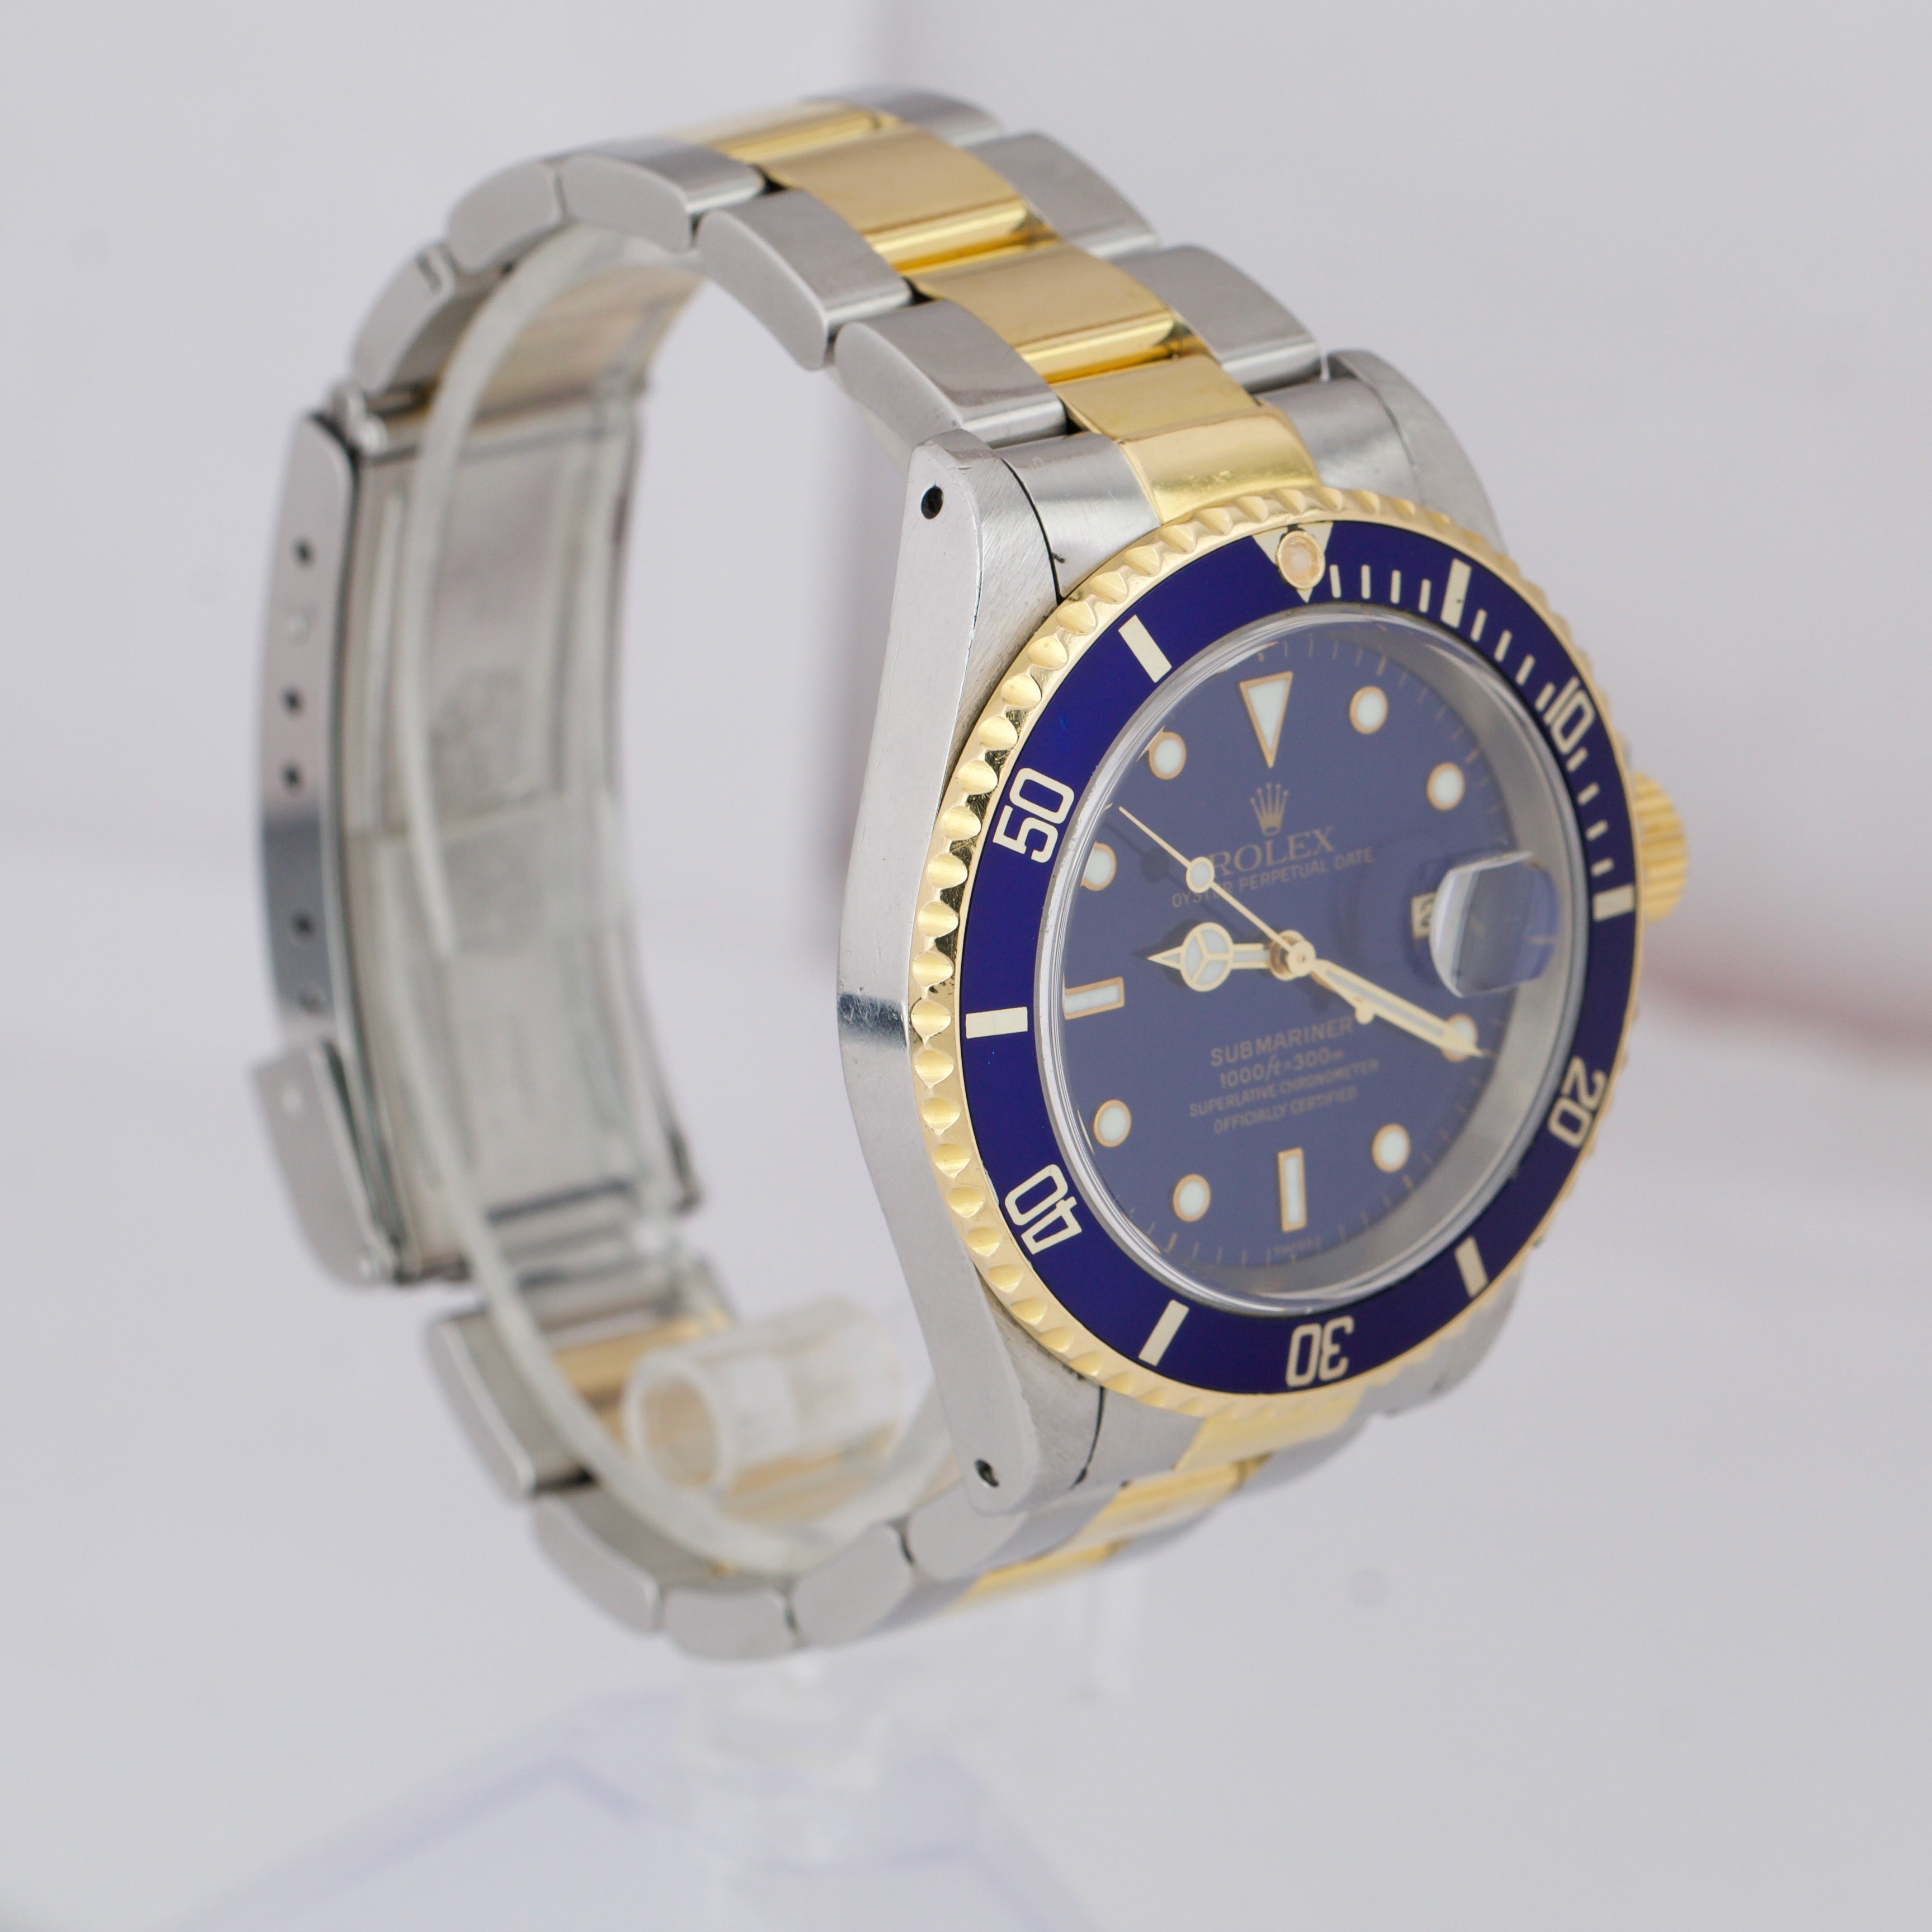 Rolex Submariner Date SWISS ONLY A SERIES Steel Gold Blue 40mm Dive Watch 16613